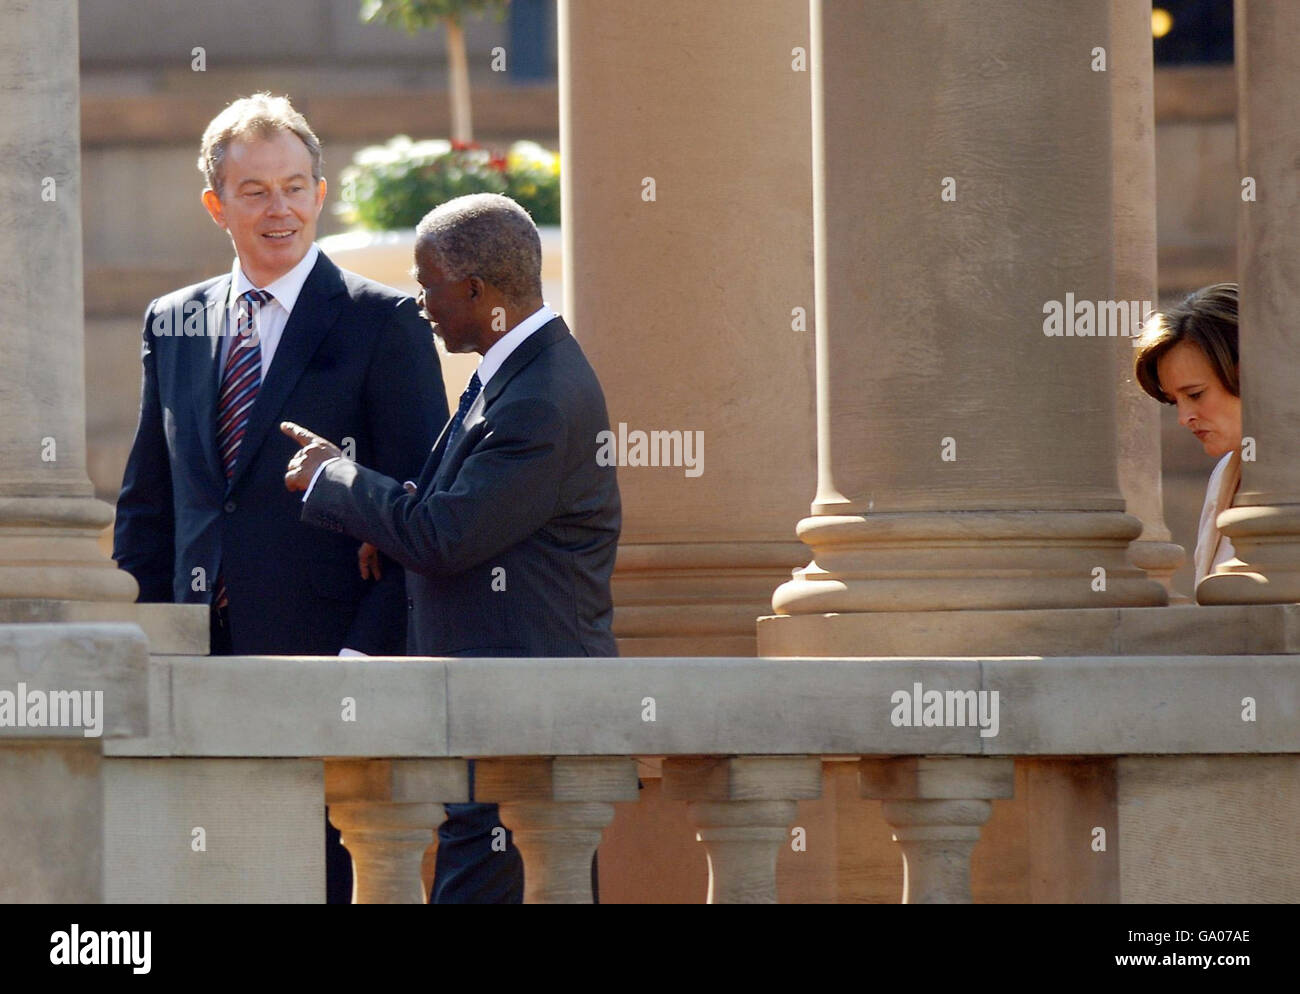 Prime Minister Tony Blair and his wife Cherie meet South African President Thabo Mbeki at the Union Buildings in the South African capital of Pretoria. Stock Photo